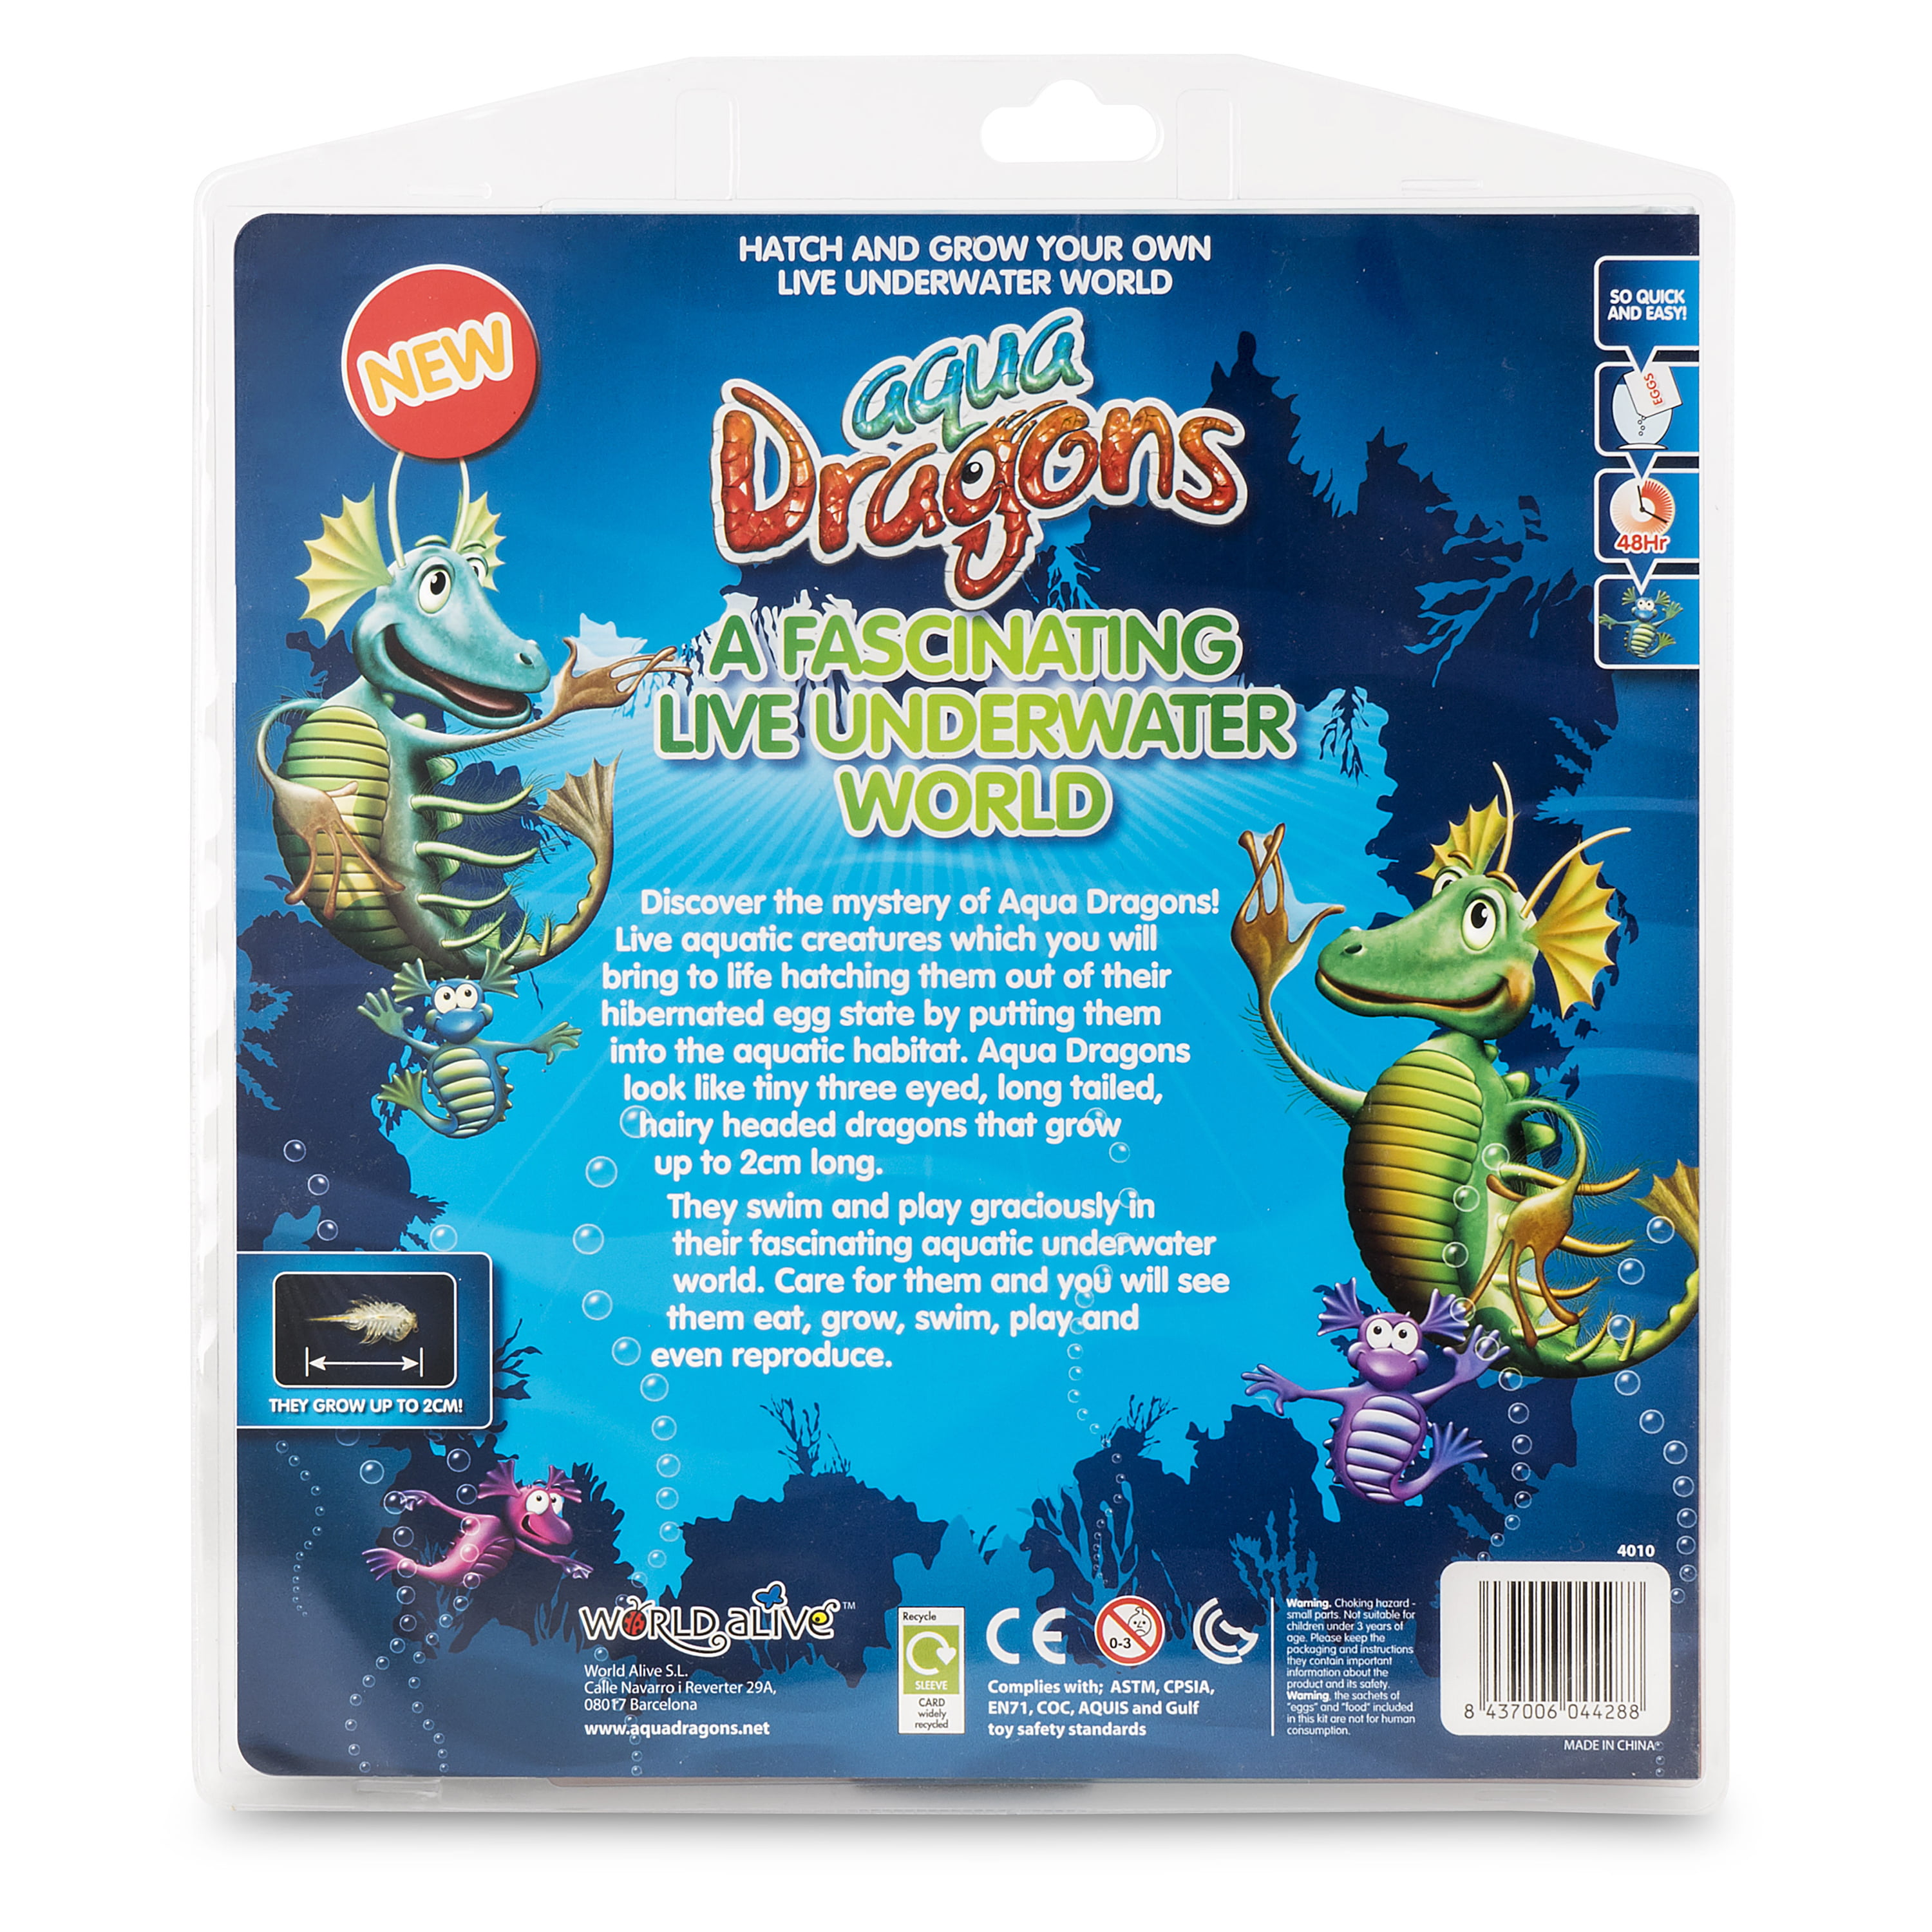 Refill pack or grow in your own container Aqua Dragons Under Water Micro Pets 